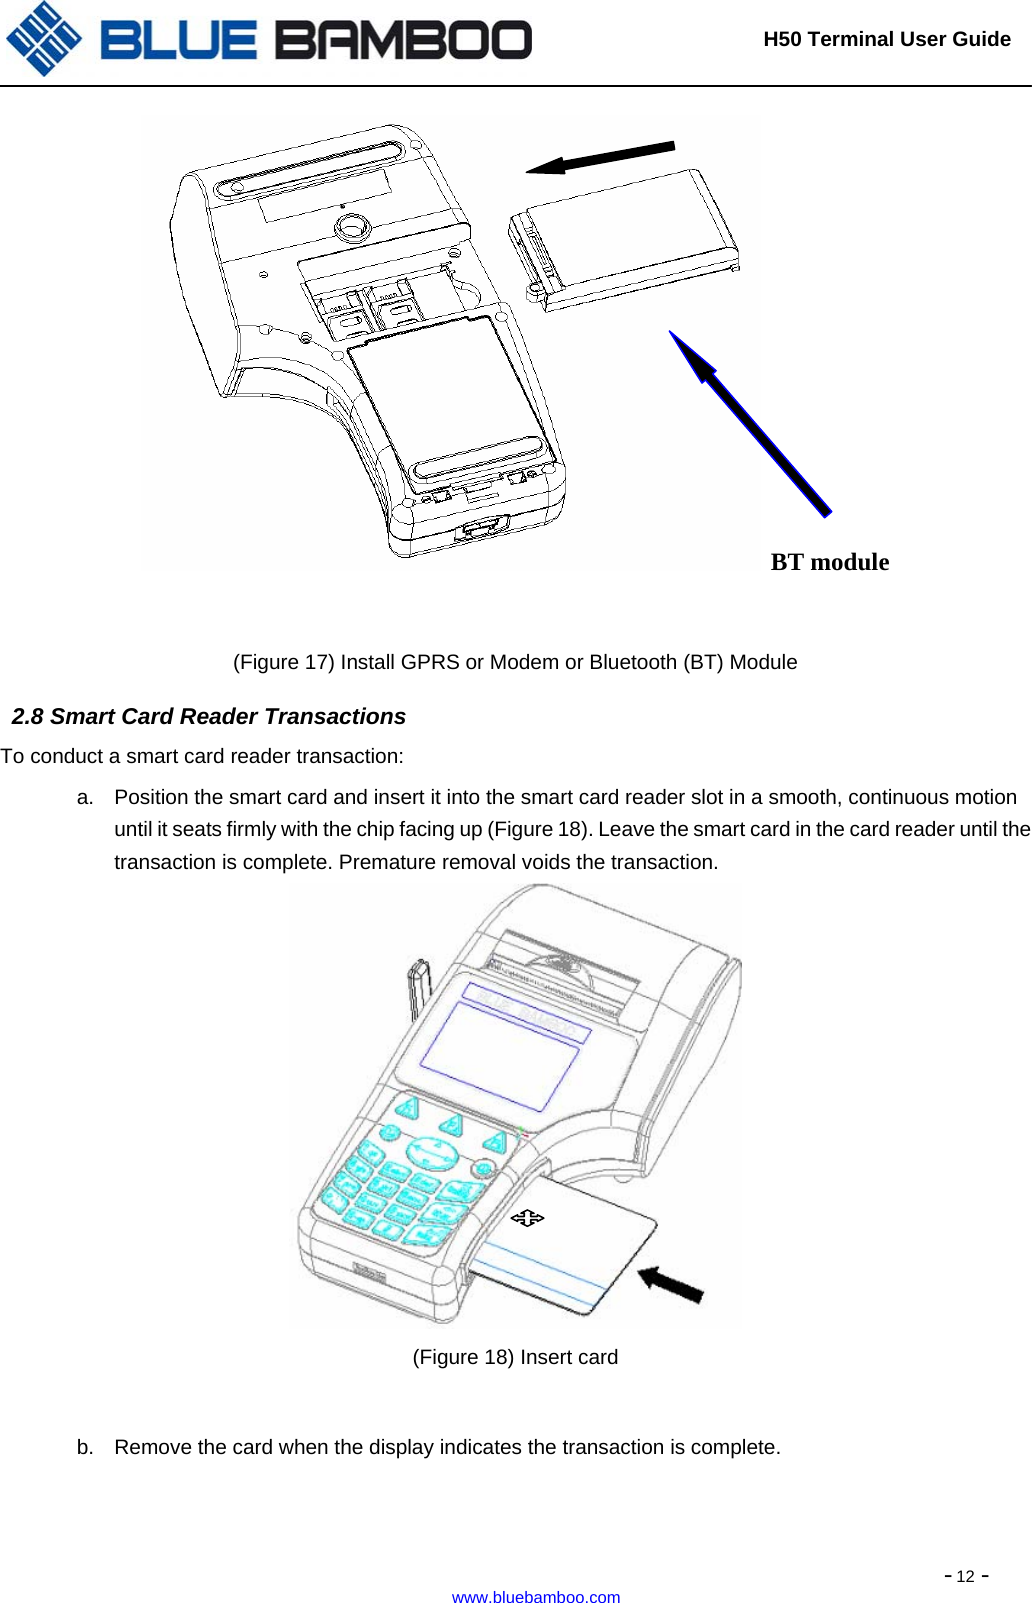                                                                       H50 Terminal User Guide  - 12 - www.bluebamboo.com   BT module  (Figure 17) Install GPRS or Modem or Bluetooth (BT) Module   2.8 Smart Card Reader Transactions To conduct a smart card reader transaction: a.  Position the smart card and insert it into the smart card reader slot in a smooth, continuous motion until it seats firmly with the chip facing up (Figure 18). Leave the smart card in the card reader until the transaction is complete. Premature removal voids the transaction.  (Figure 18) Insert card  b.  Remove the card when the display indicates the transaction is complete.            